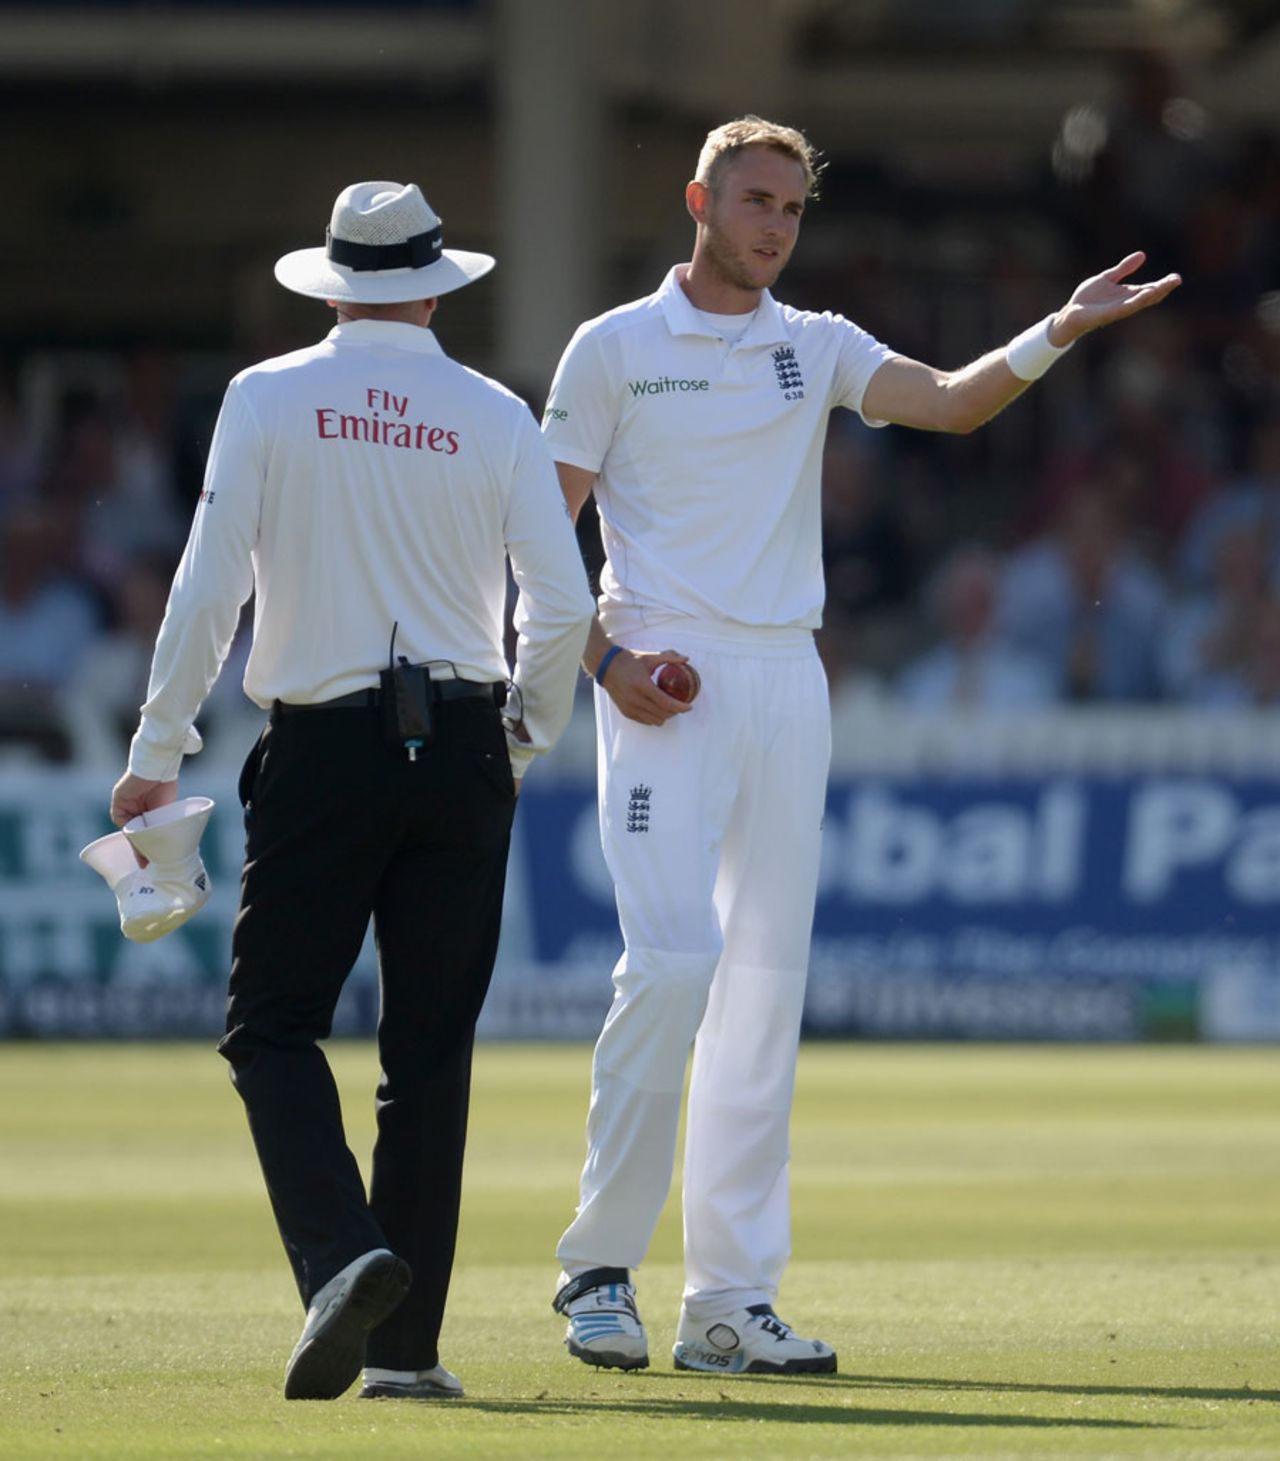 Stuart Broad was denied a wicket after Matt Prior's catch was reviewed, England v Sri Lanka, 1st Investec Test, Lord's, 2nd day, June 13, 2014